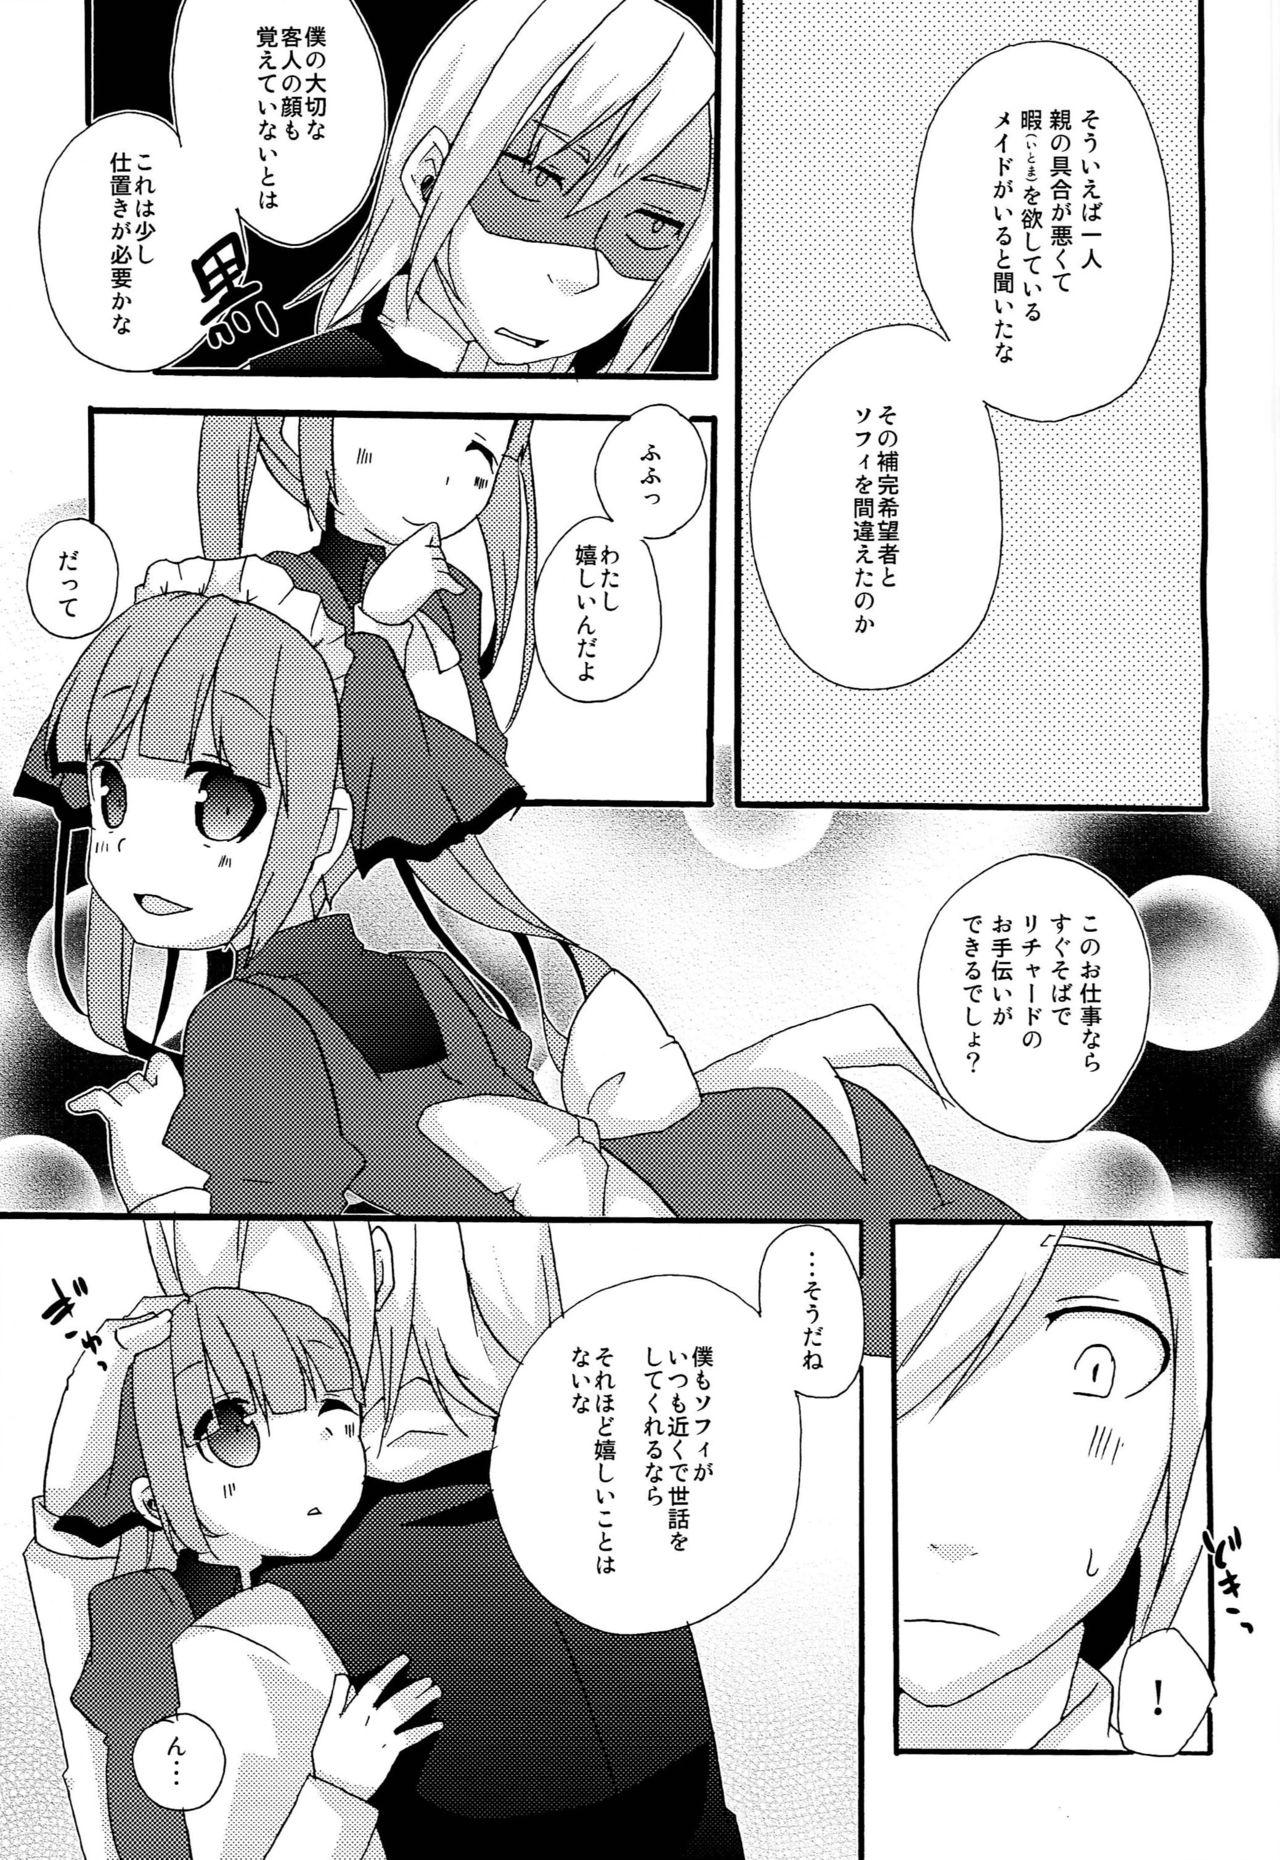 Viet Nam Now Working - Tales of graces Sislovesme - Page 5